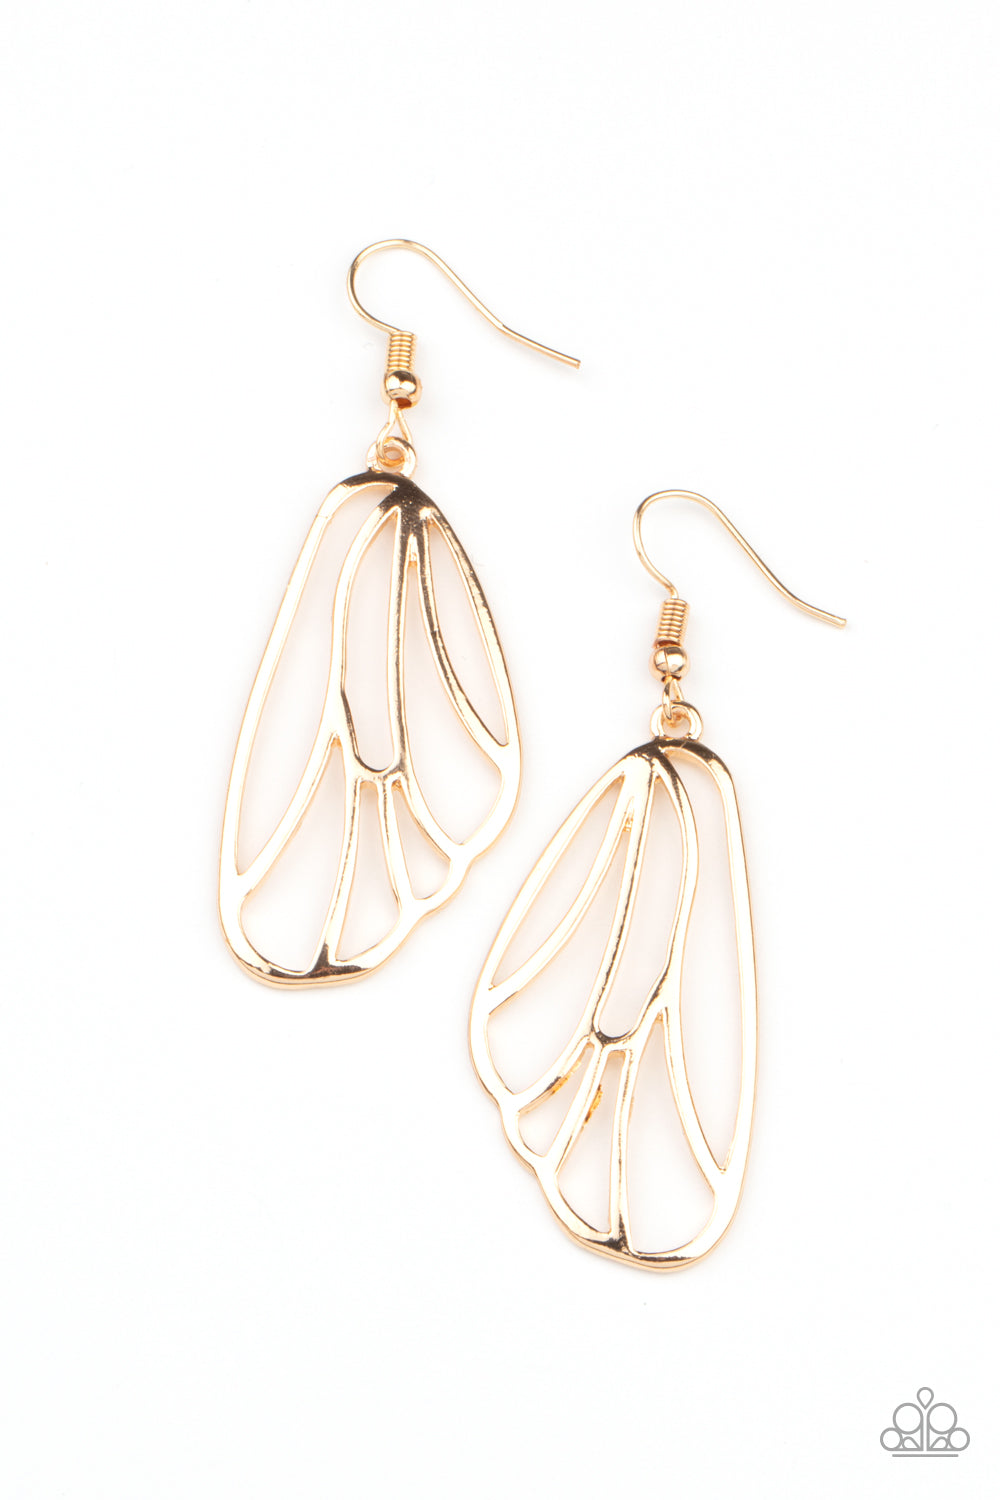 Turn Into A Butterfly - Gold Earrings - Princess Glam Shop